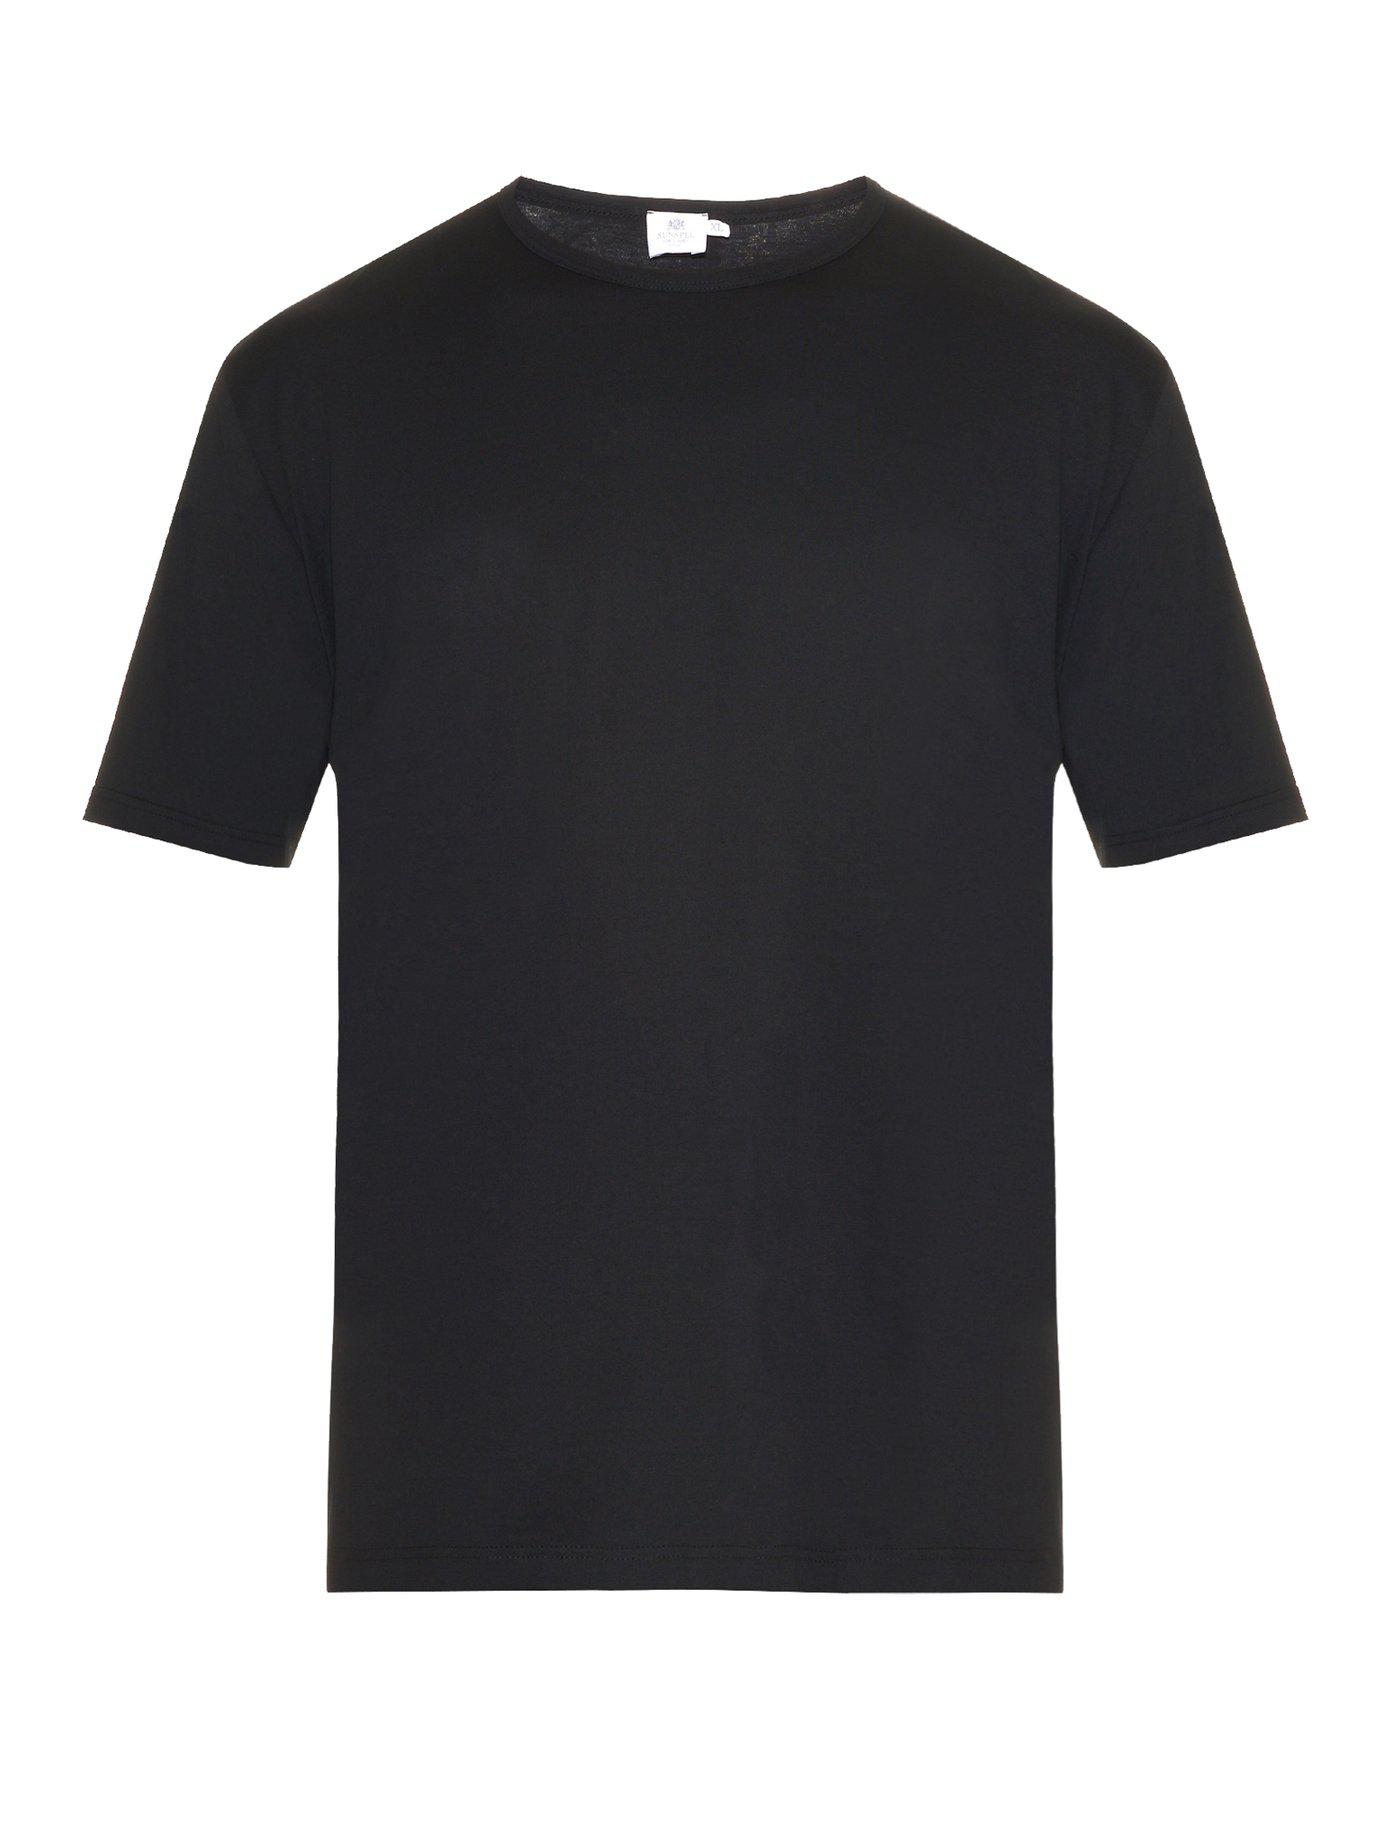 Lyst - Sunspel Crew Neck Cotton Jersey T Shirt in Black for Men - Save 12%